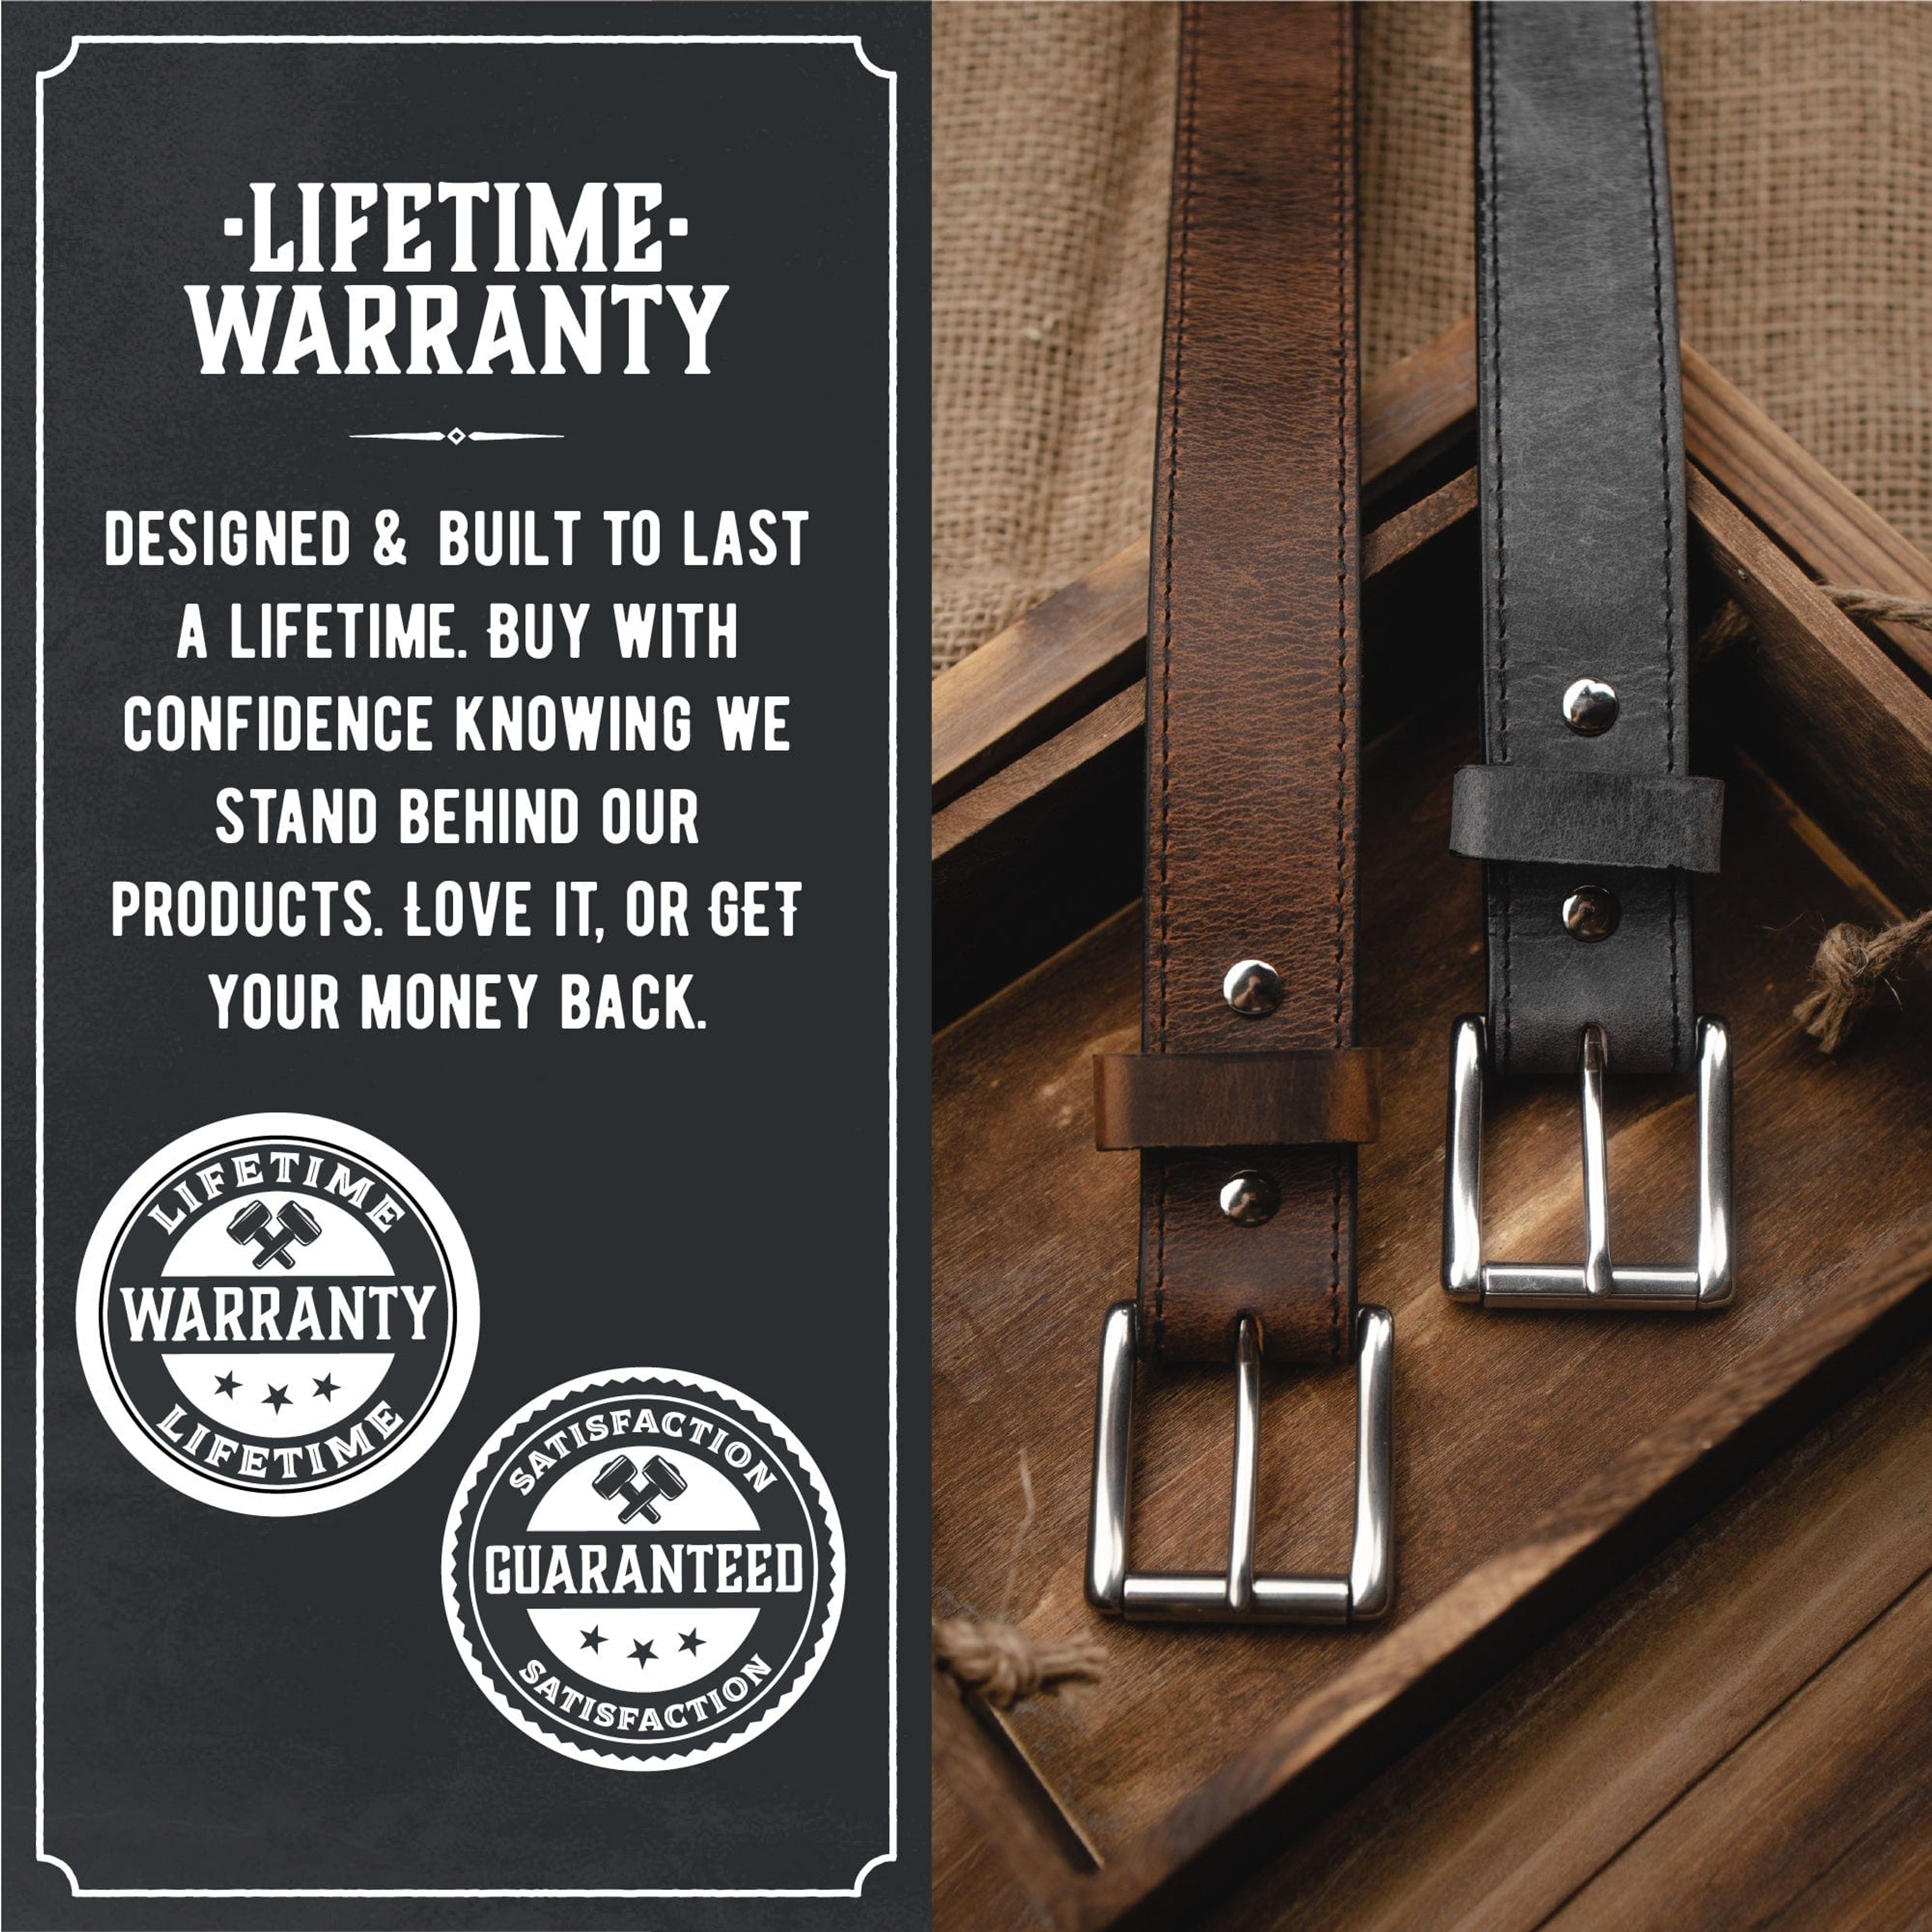 The Classic Leather Everyday Belt - Main Street Forge